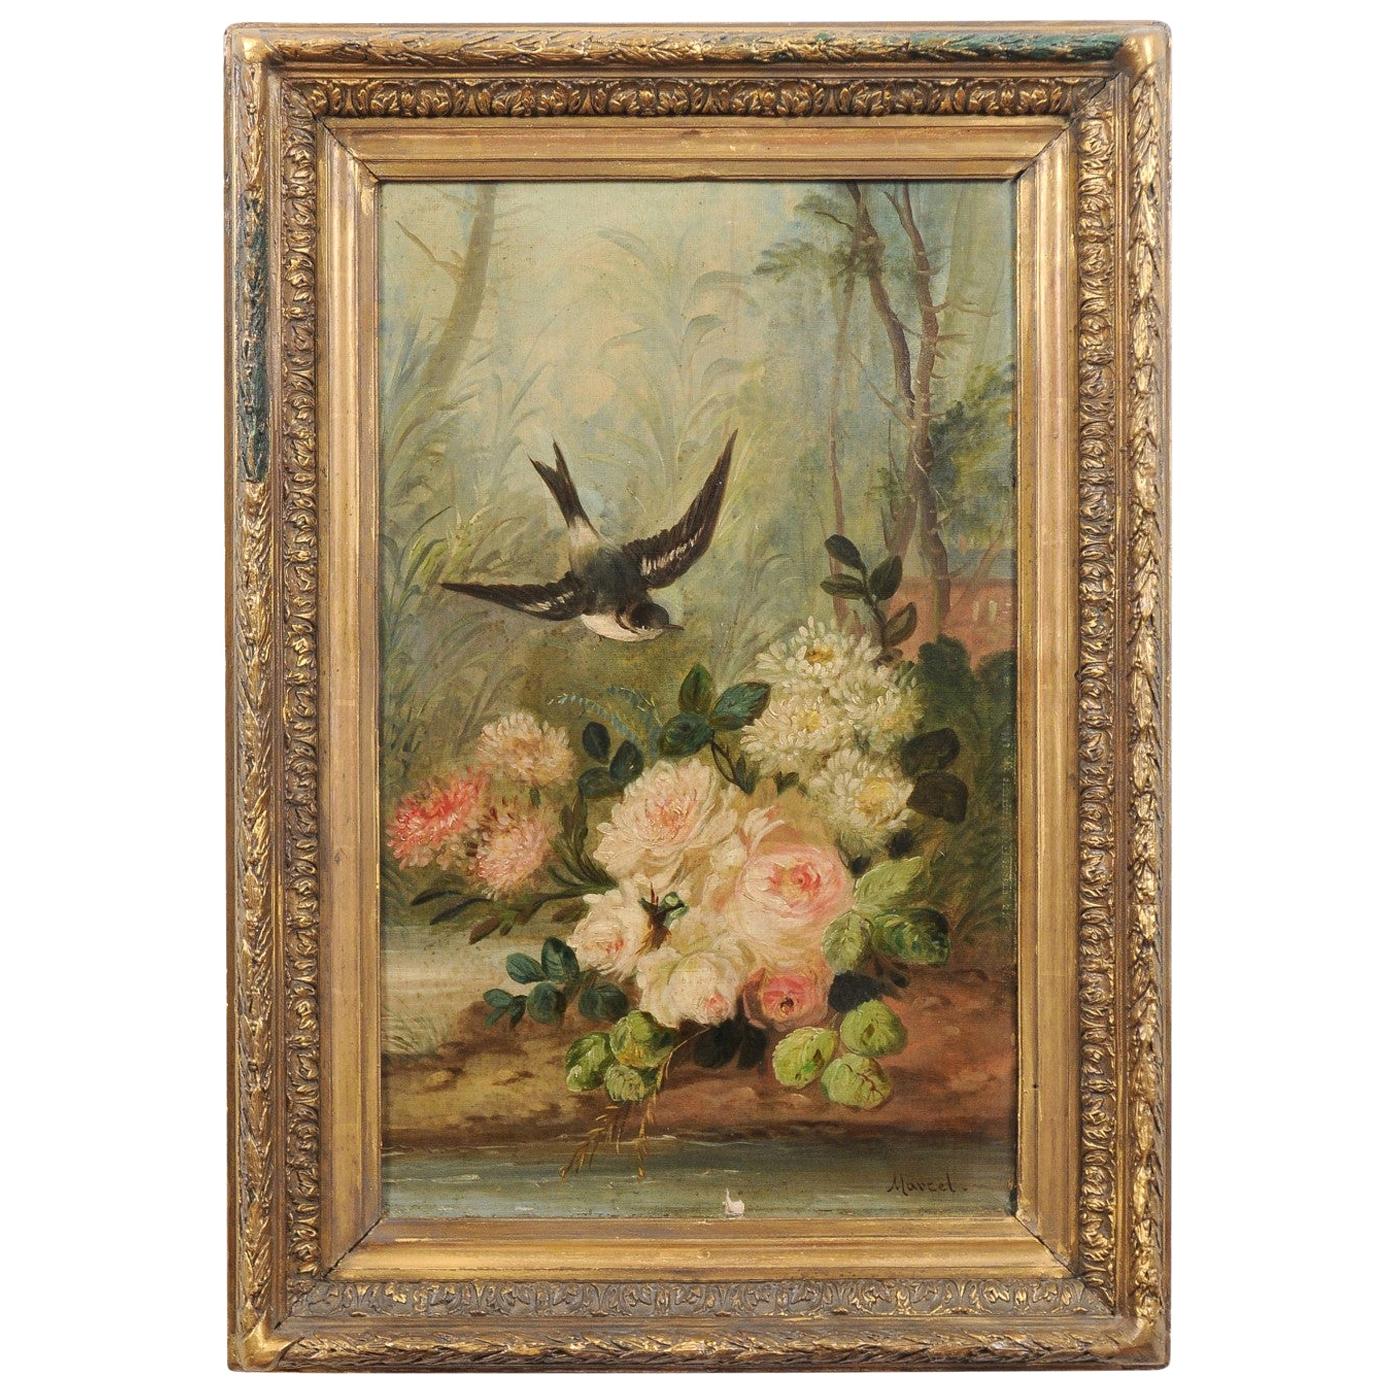 French Napoléon III 1850s Oil on Canvas Framed Painting with Bird and Roses For Sale